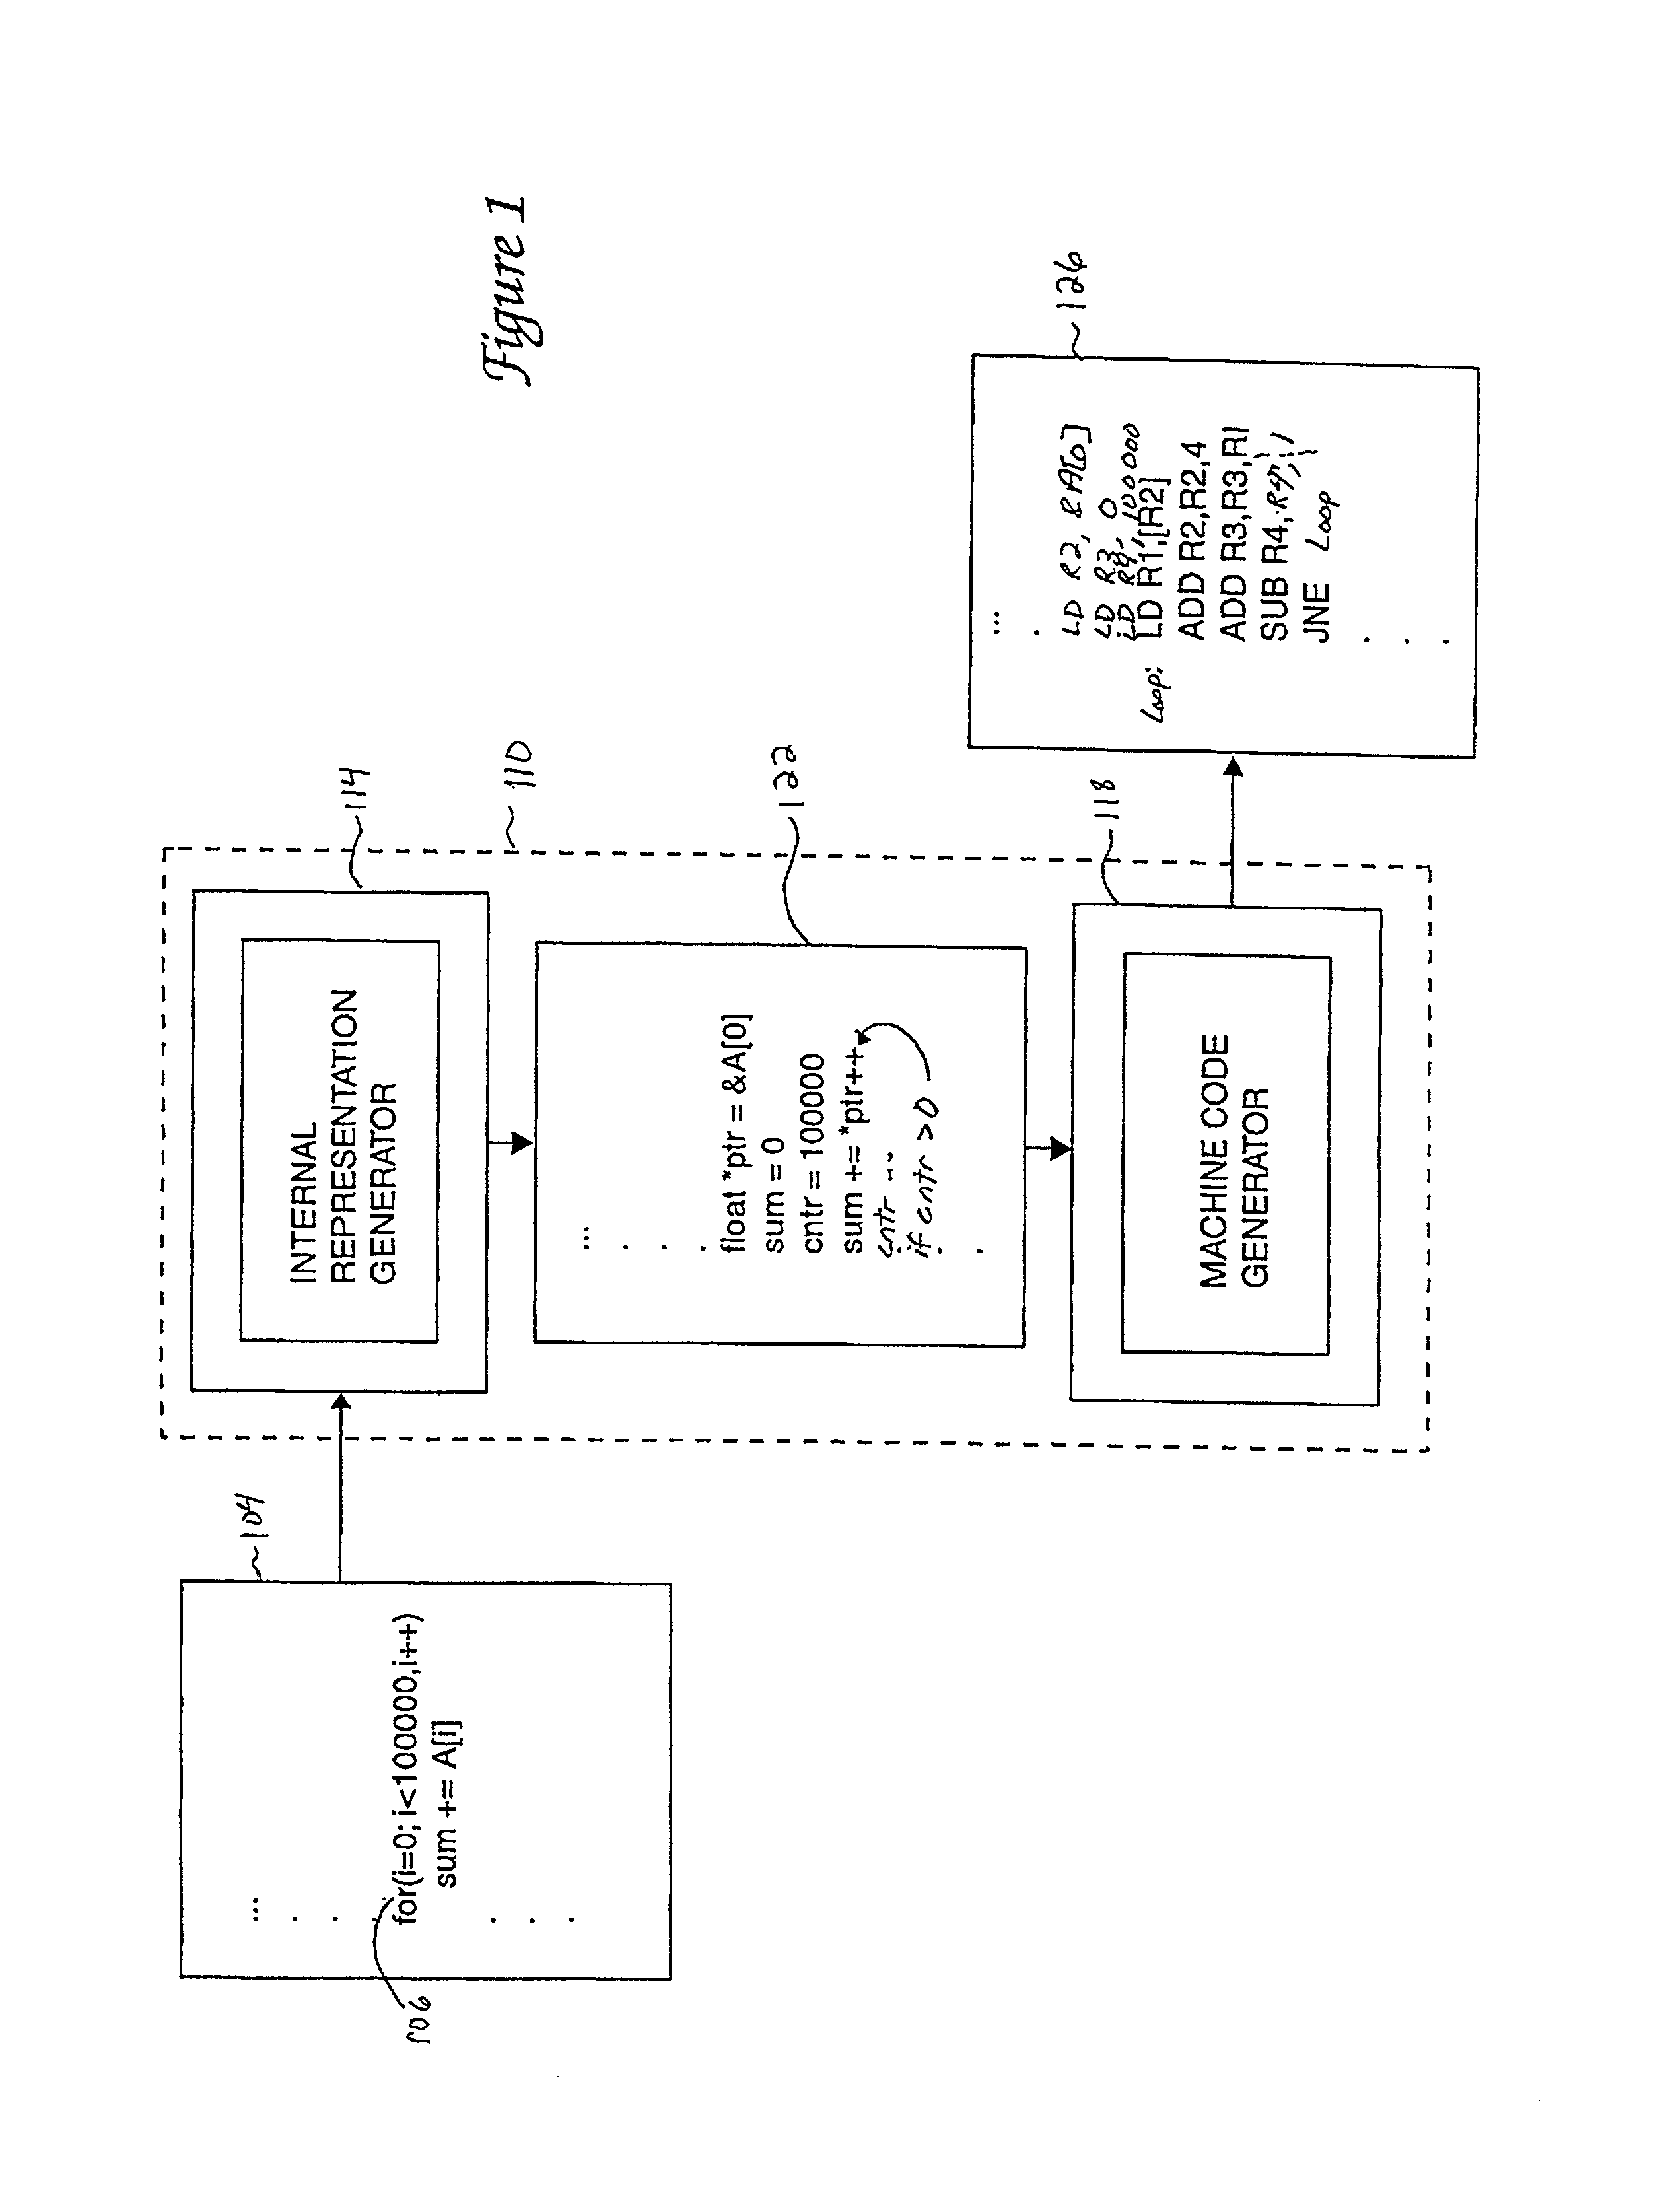 Method and apparatus for debugging optimized code